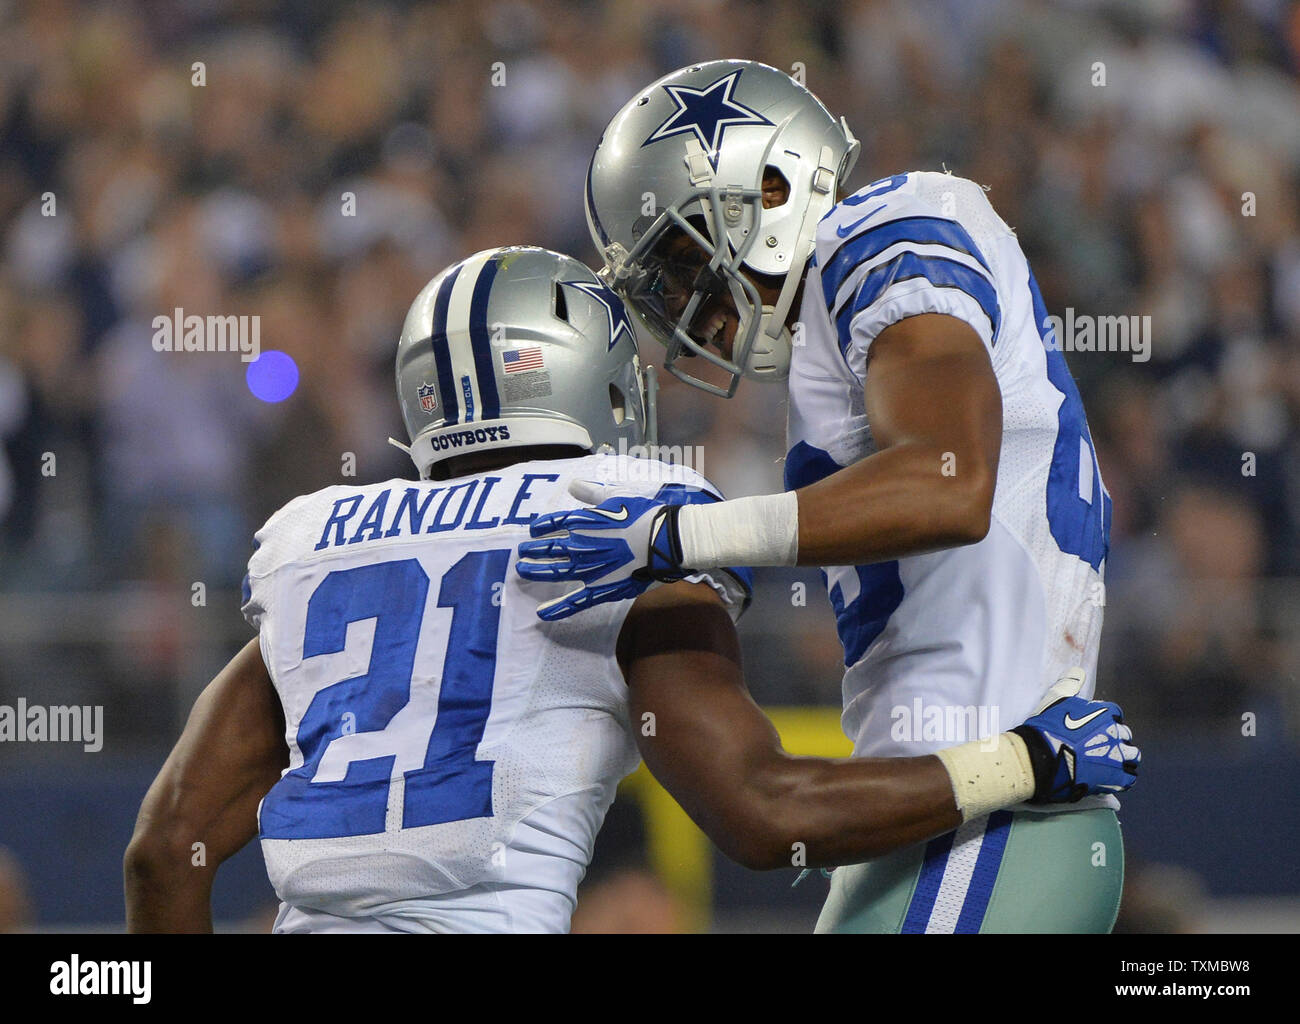 Dallas Cowboys Joseph Randle is congratulated by teammate Dez Bryant after Randle ran for a 1-yard touchdown against the Washington Redskins in the fourth quarter at AT&T Stadium in Arlington, Texas on October 13, 2013. UPI/Kevin Dietsch Stock Photo